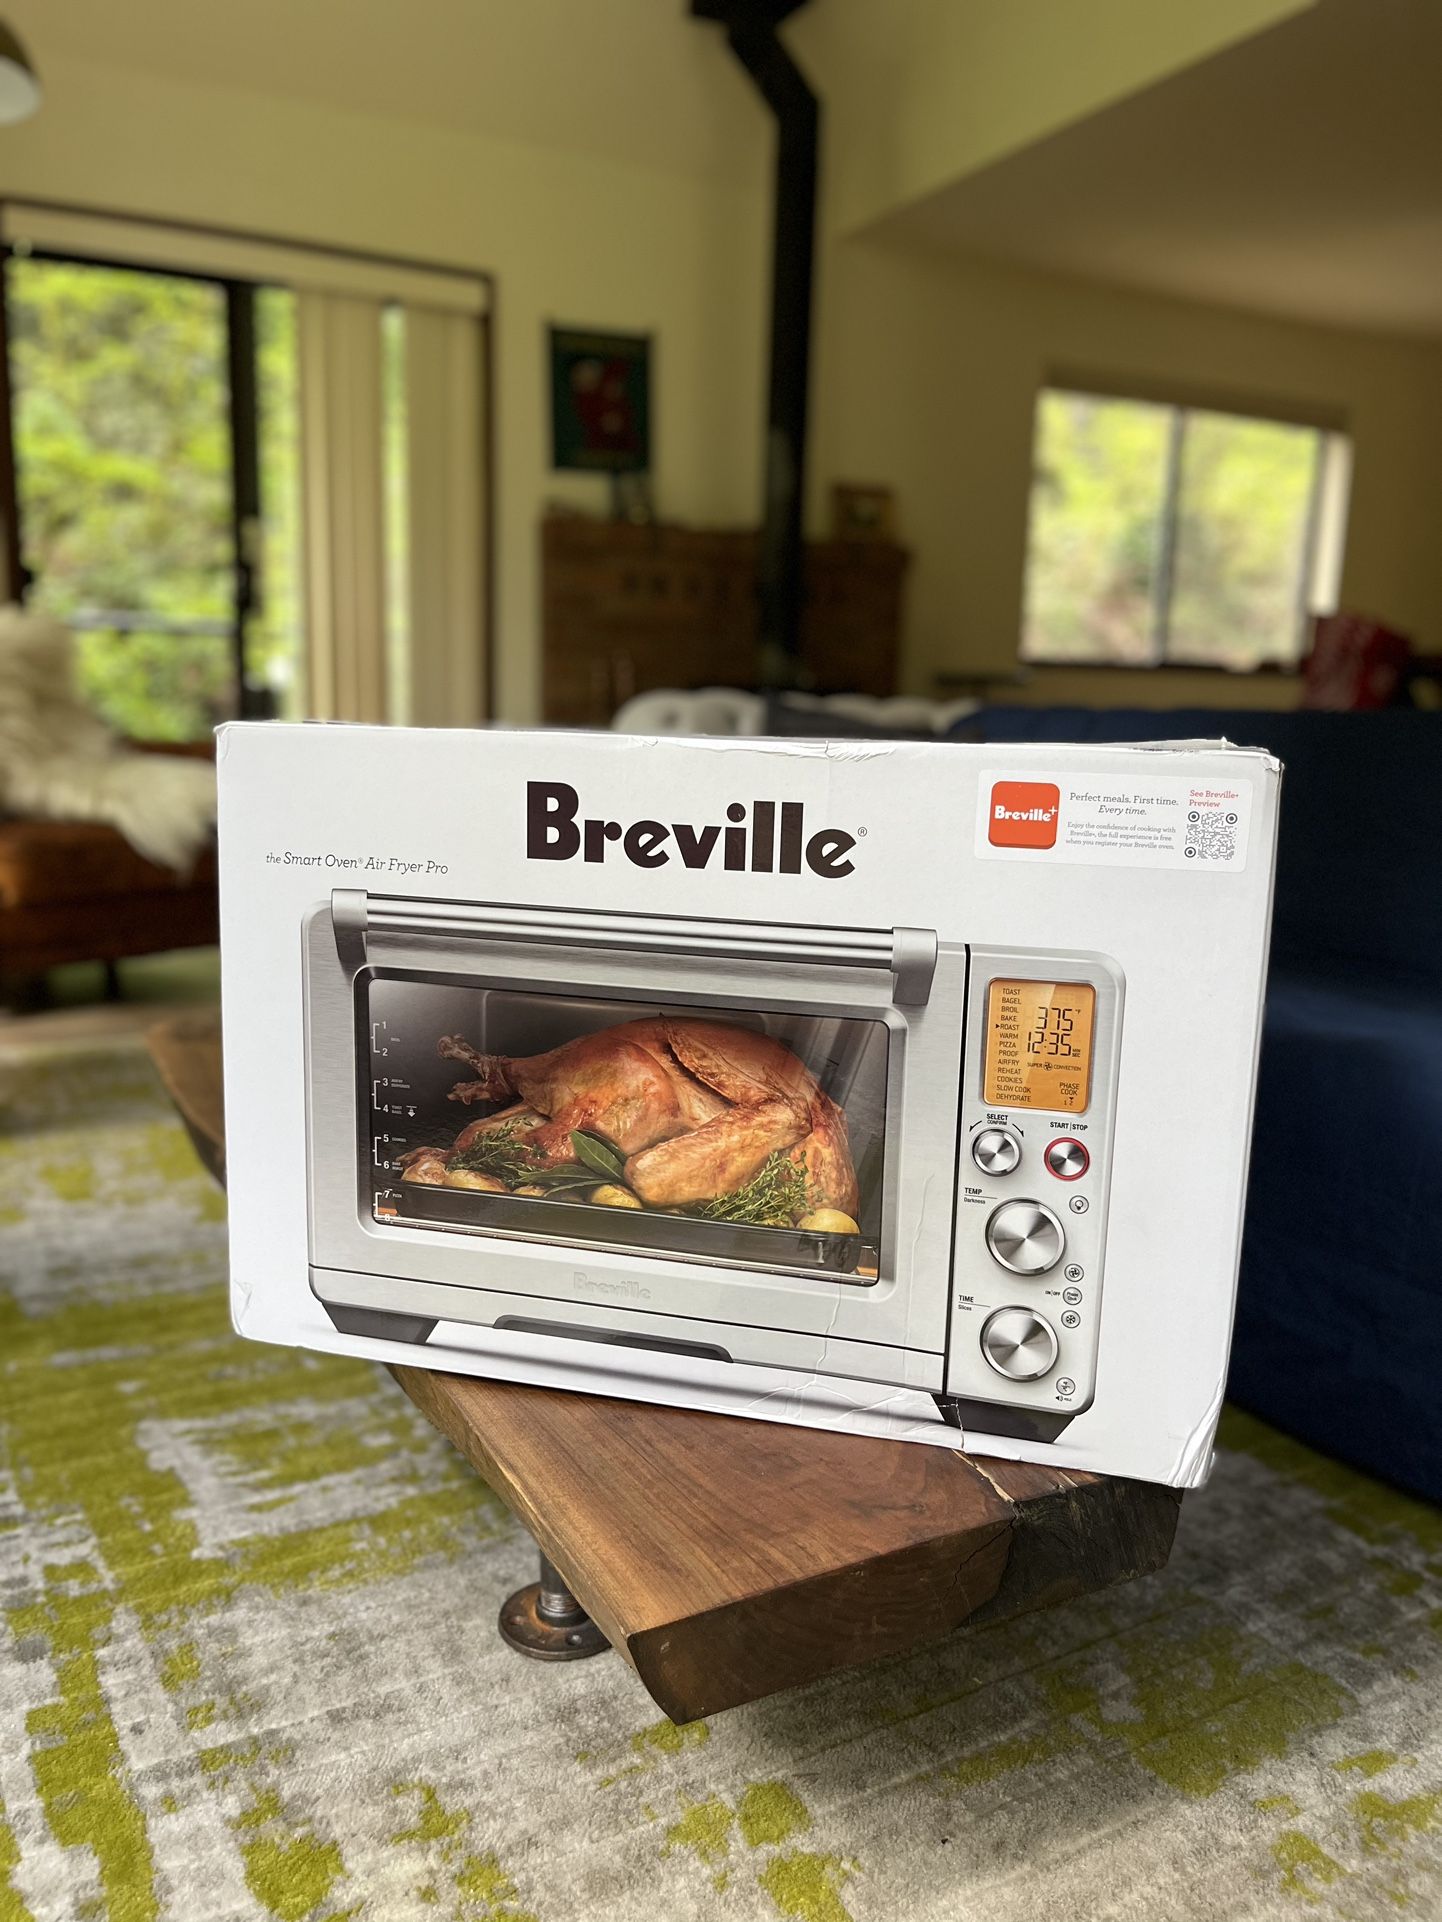 Breville The Smart Oven Air Fryer Pro